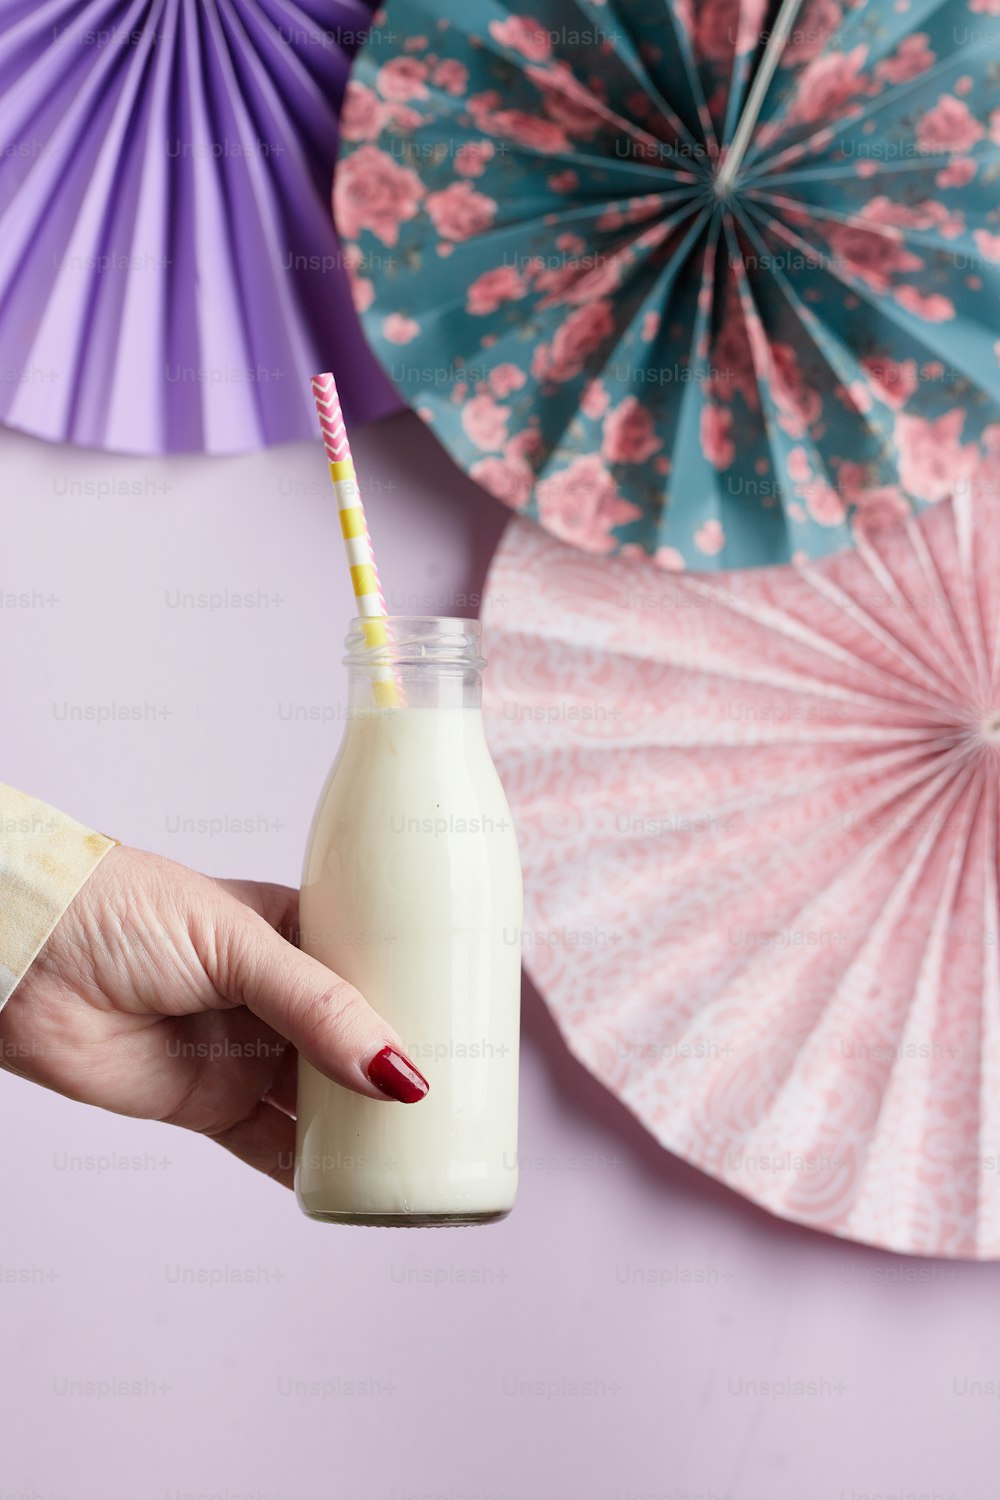 a hand holding a glass of milk next to paper fans